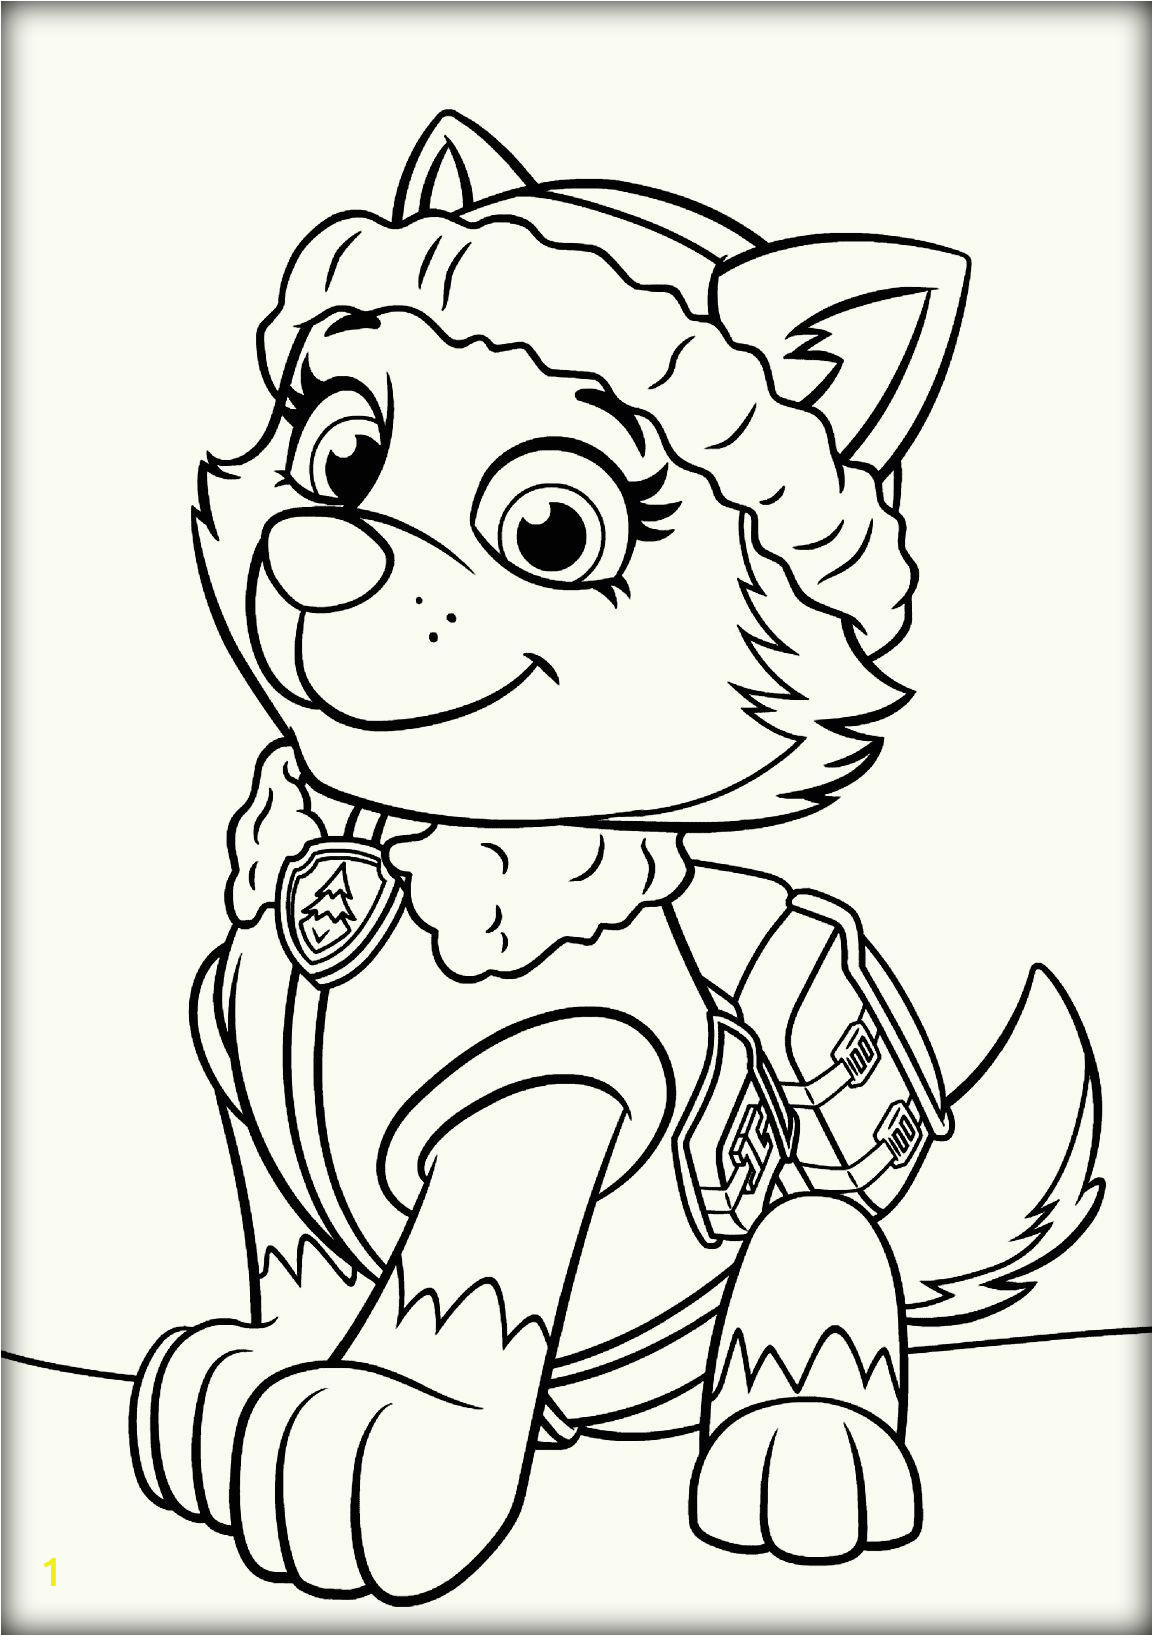 Coloring Pages Of Paw Patrol Paw Patrol Everest Coloring Pages with Images